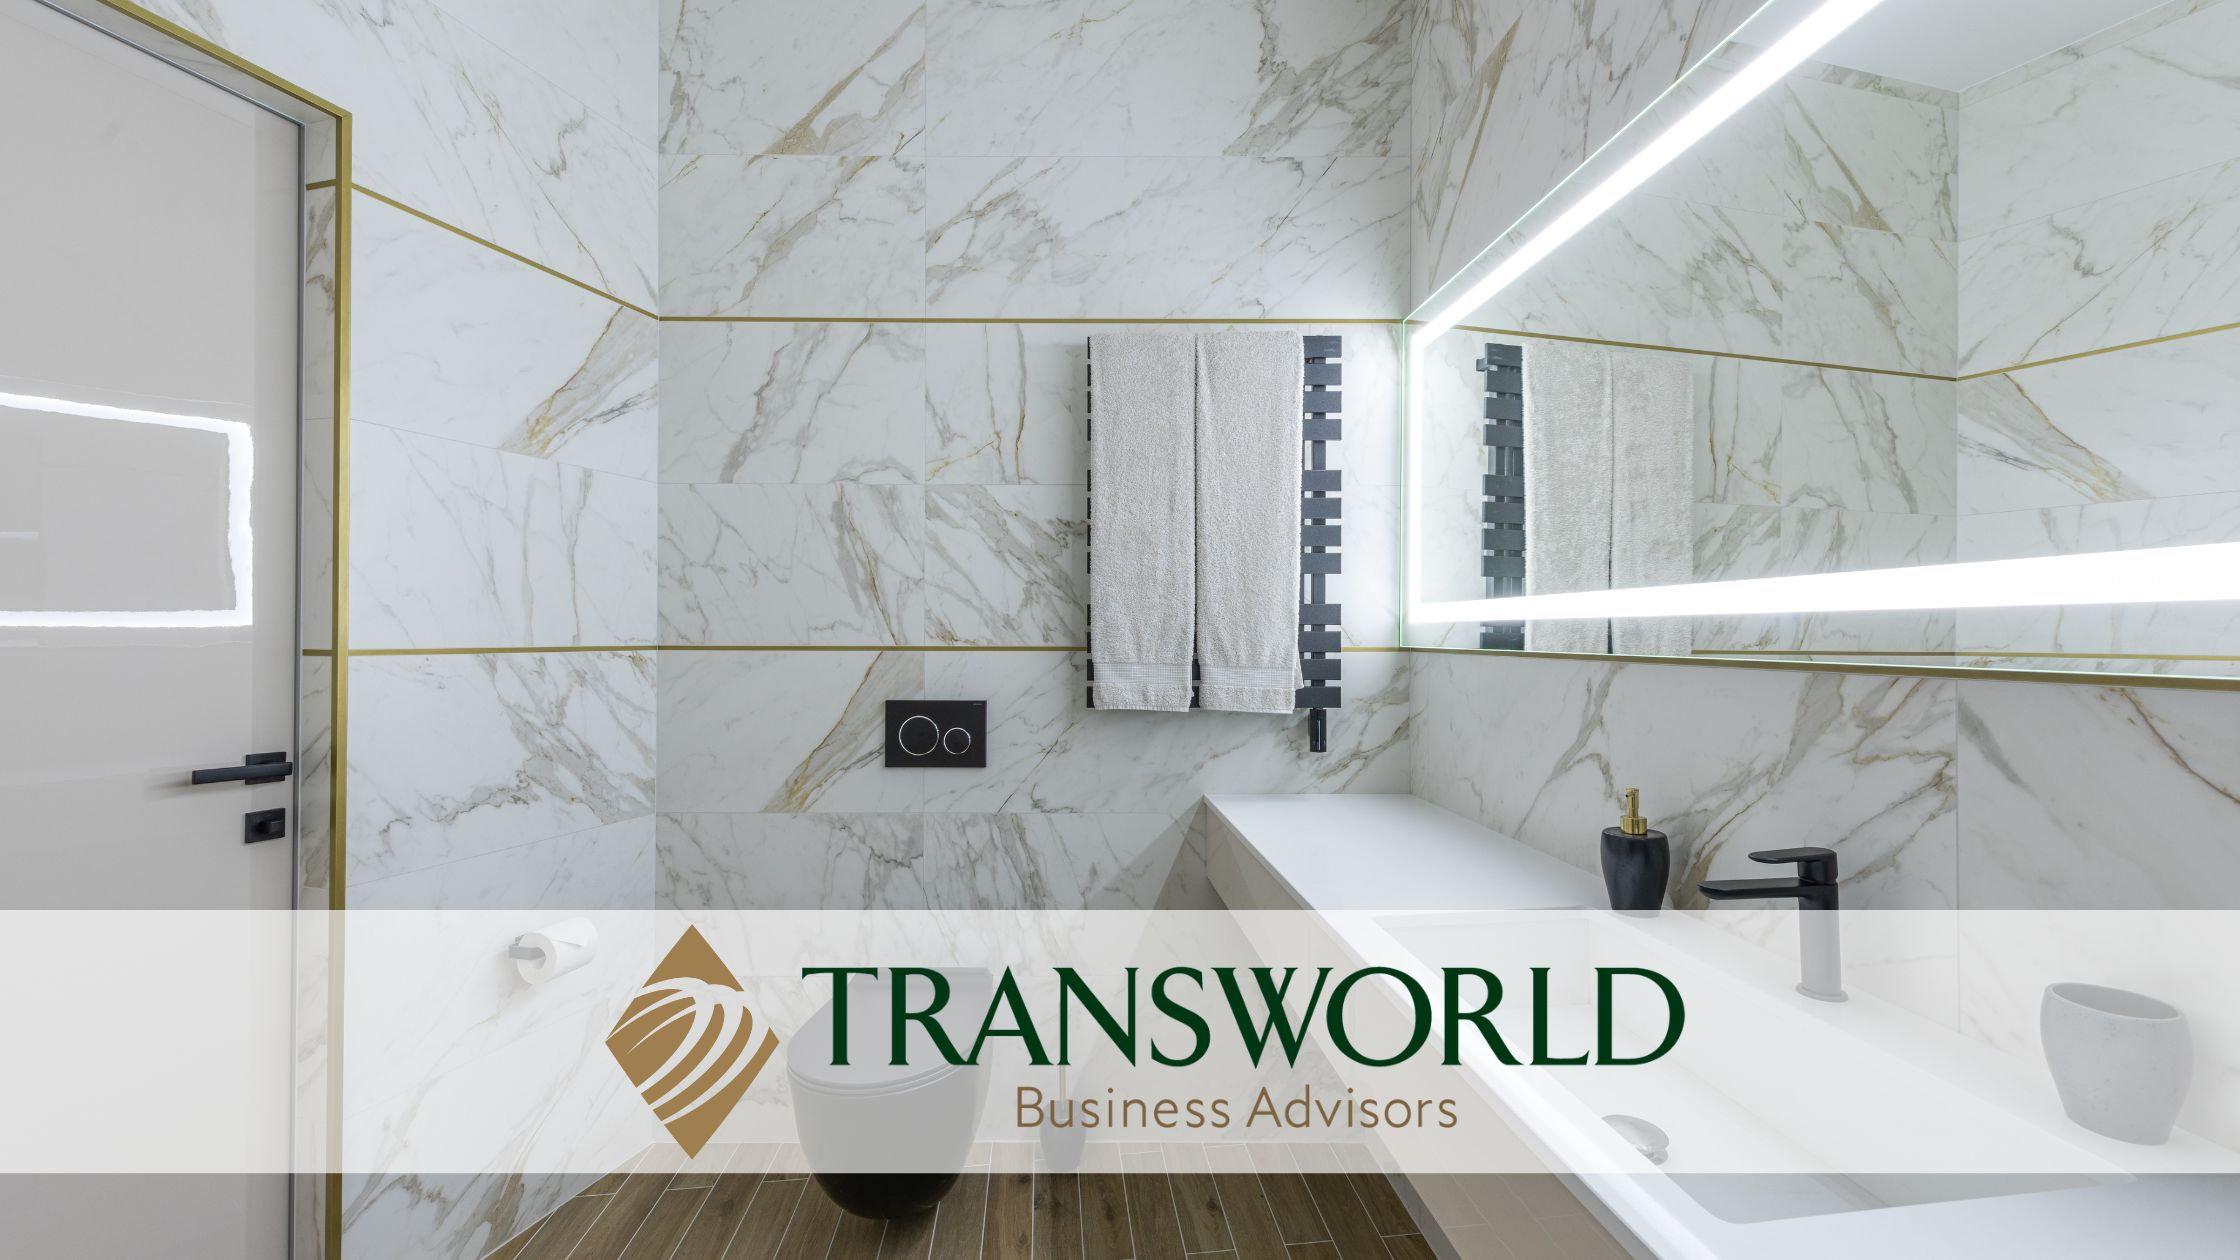 SBA Approved Tile Stone Business in Niche Luxury Market